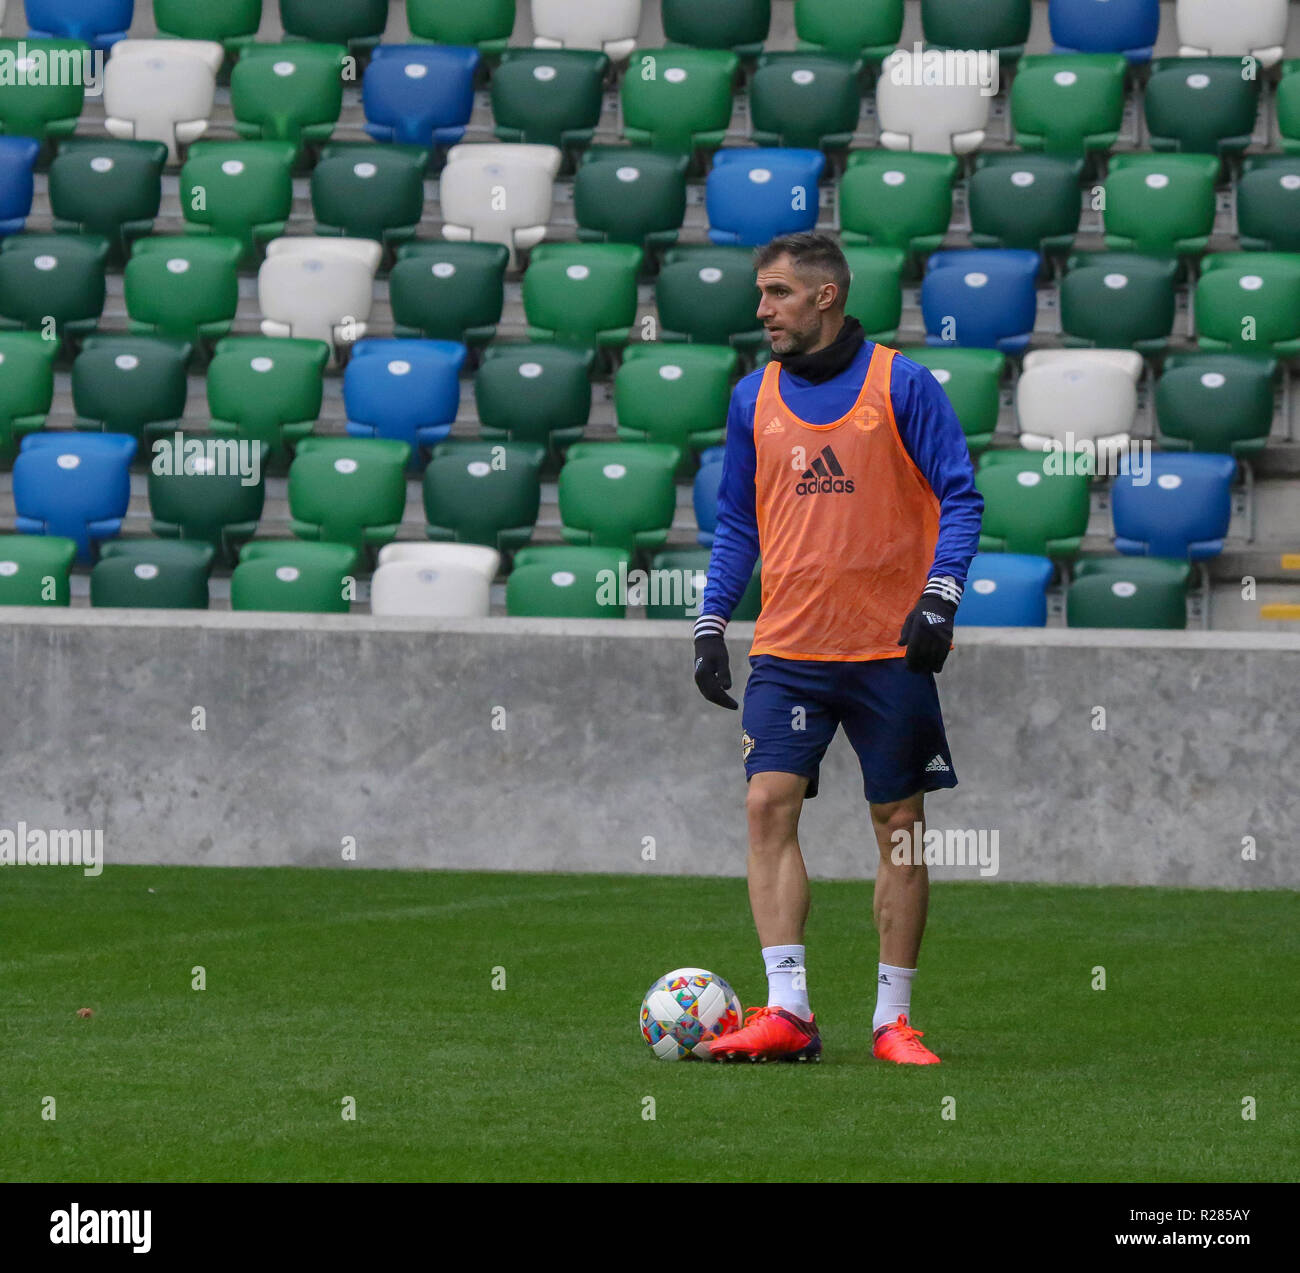 Windsor Park, Belfast, Northern Ireland.17 November 2018. Northern Ireland training in Belfast this morning ahead of their UEFA Nations League game against Austria tomorrow night in the stadium. Aaron Hughes in training. Credit: David Hunter/Alamy Live News. Stock Photo